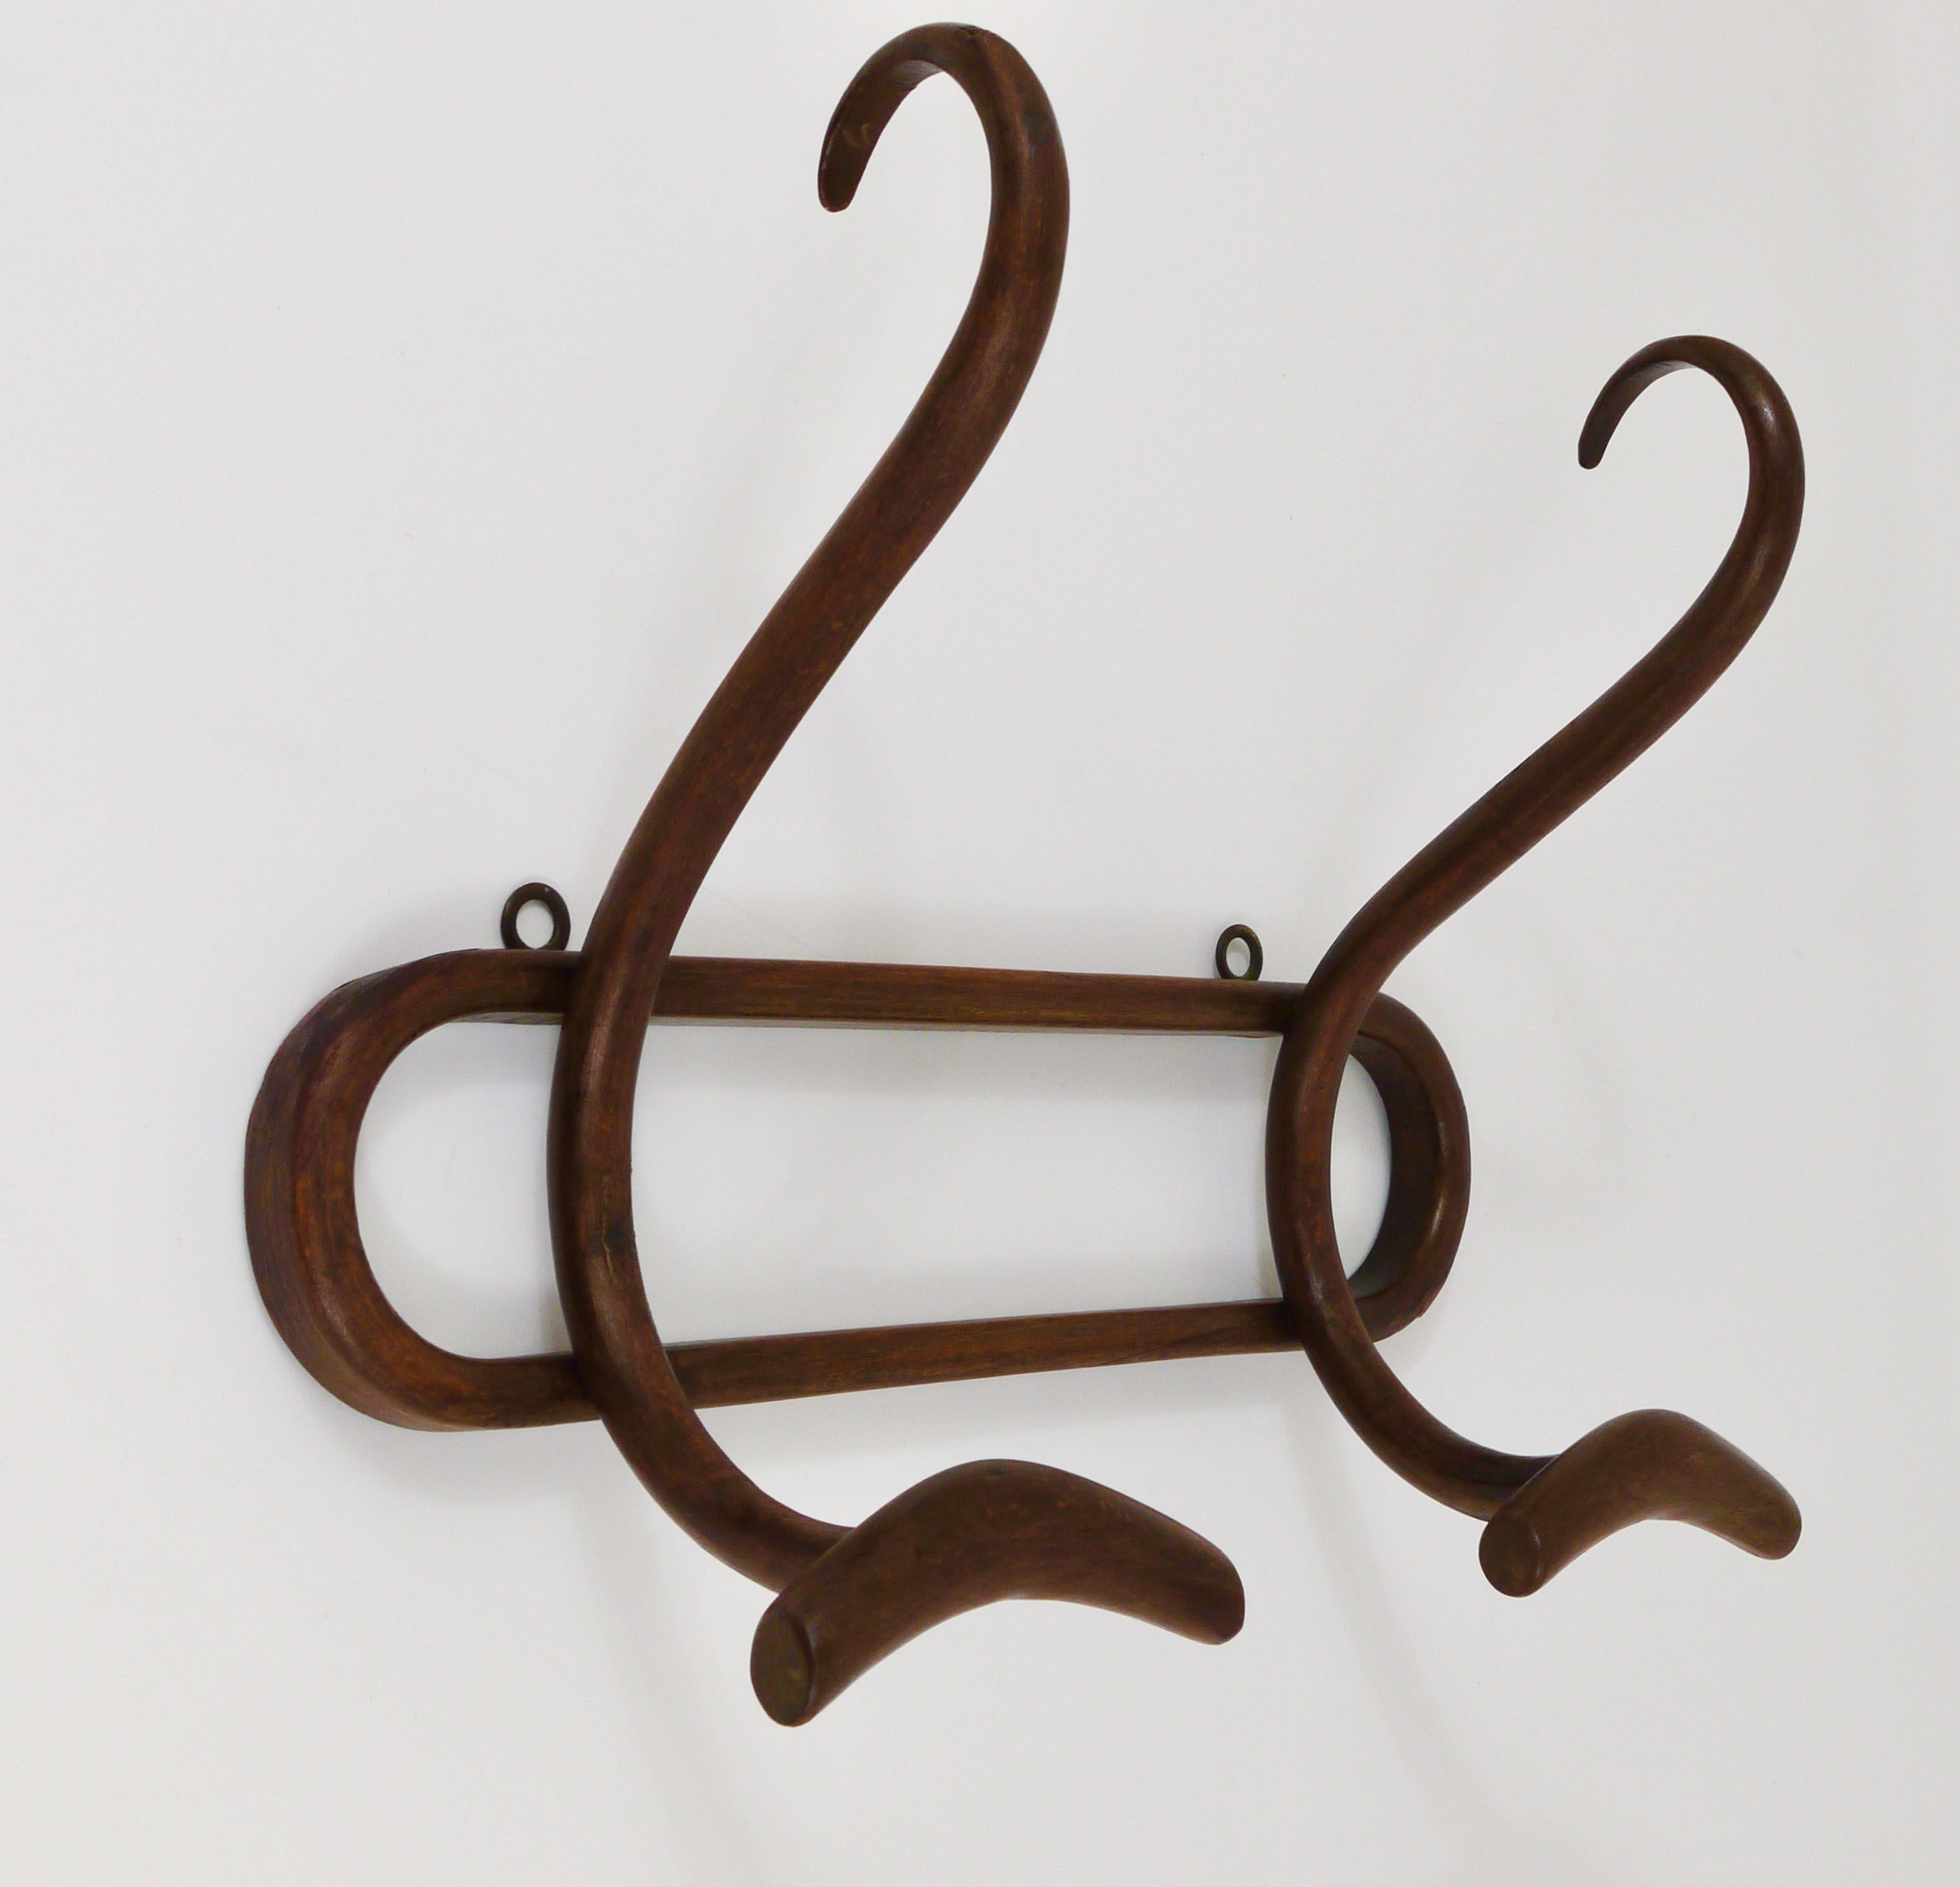 French 1920s Baumann France Art Nouveau Bentwood Wall Coat Rack with S Hooks